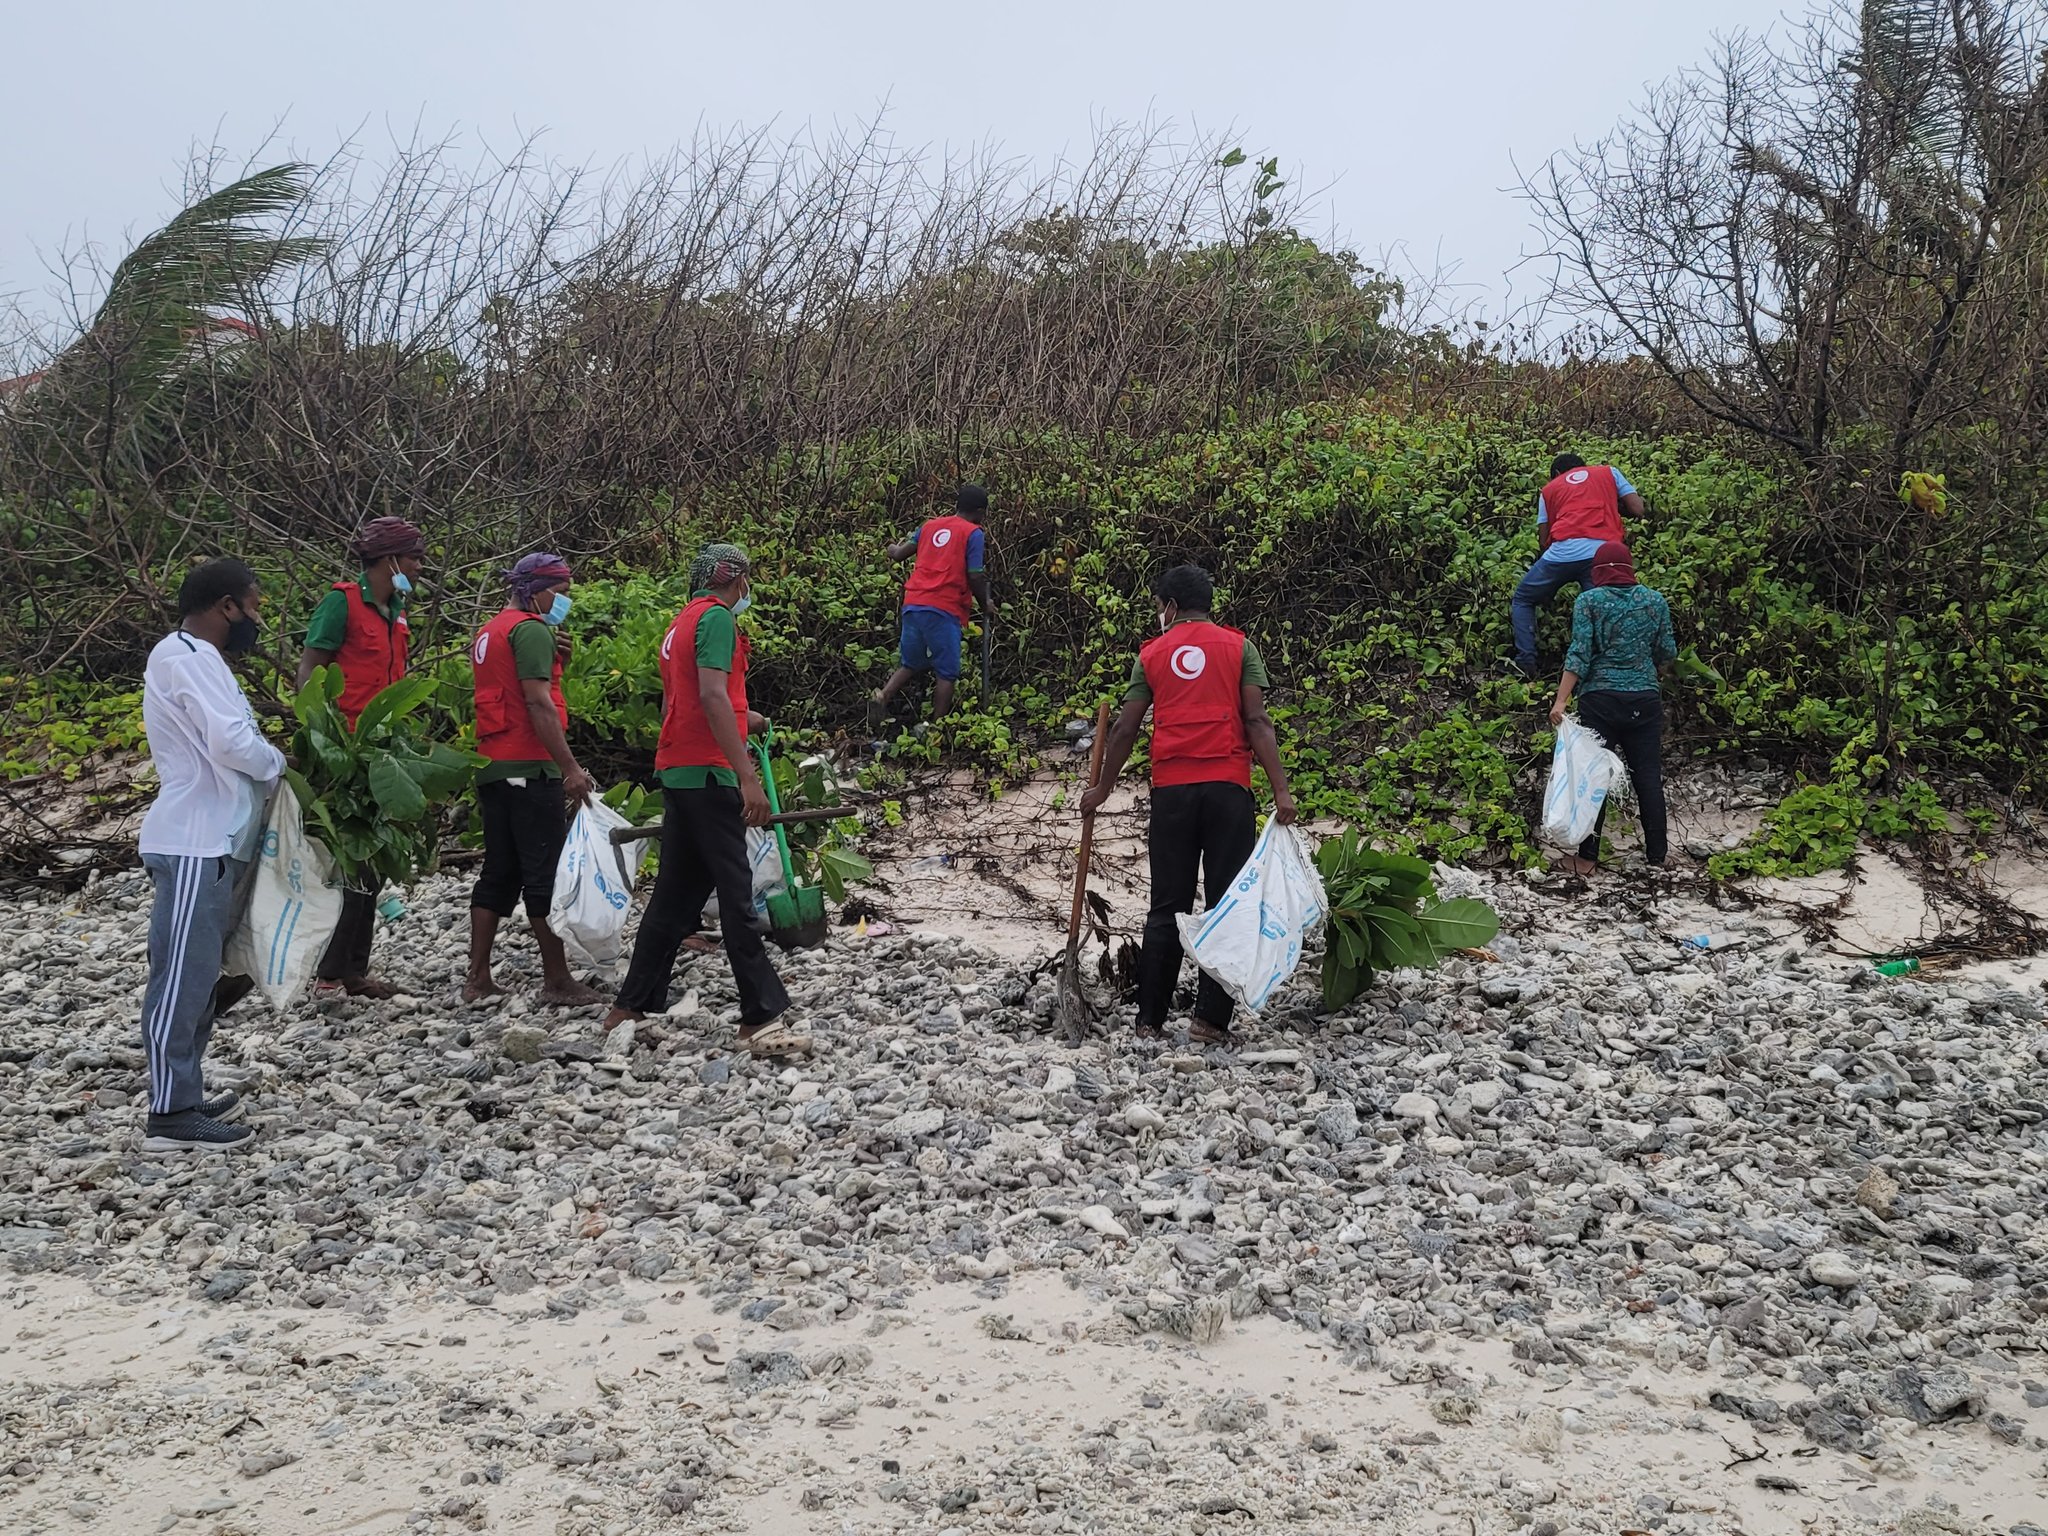 Tree planting activities being conducted in Addu City.